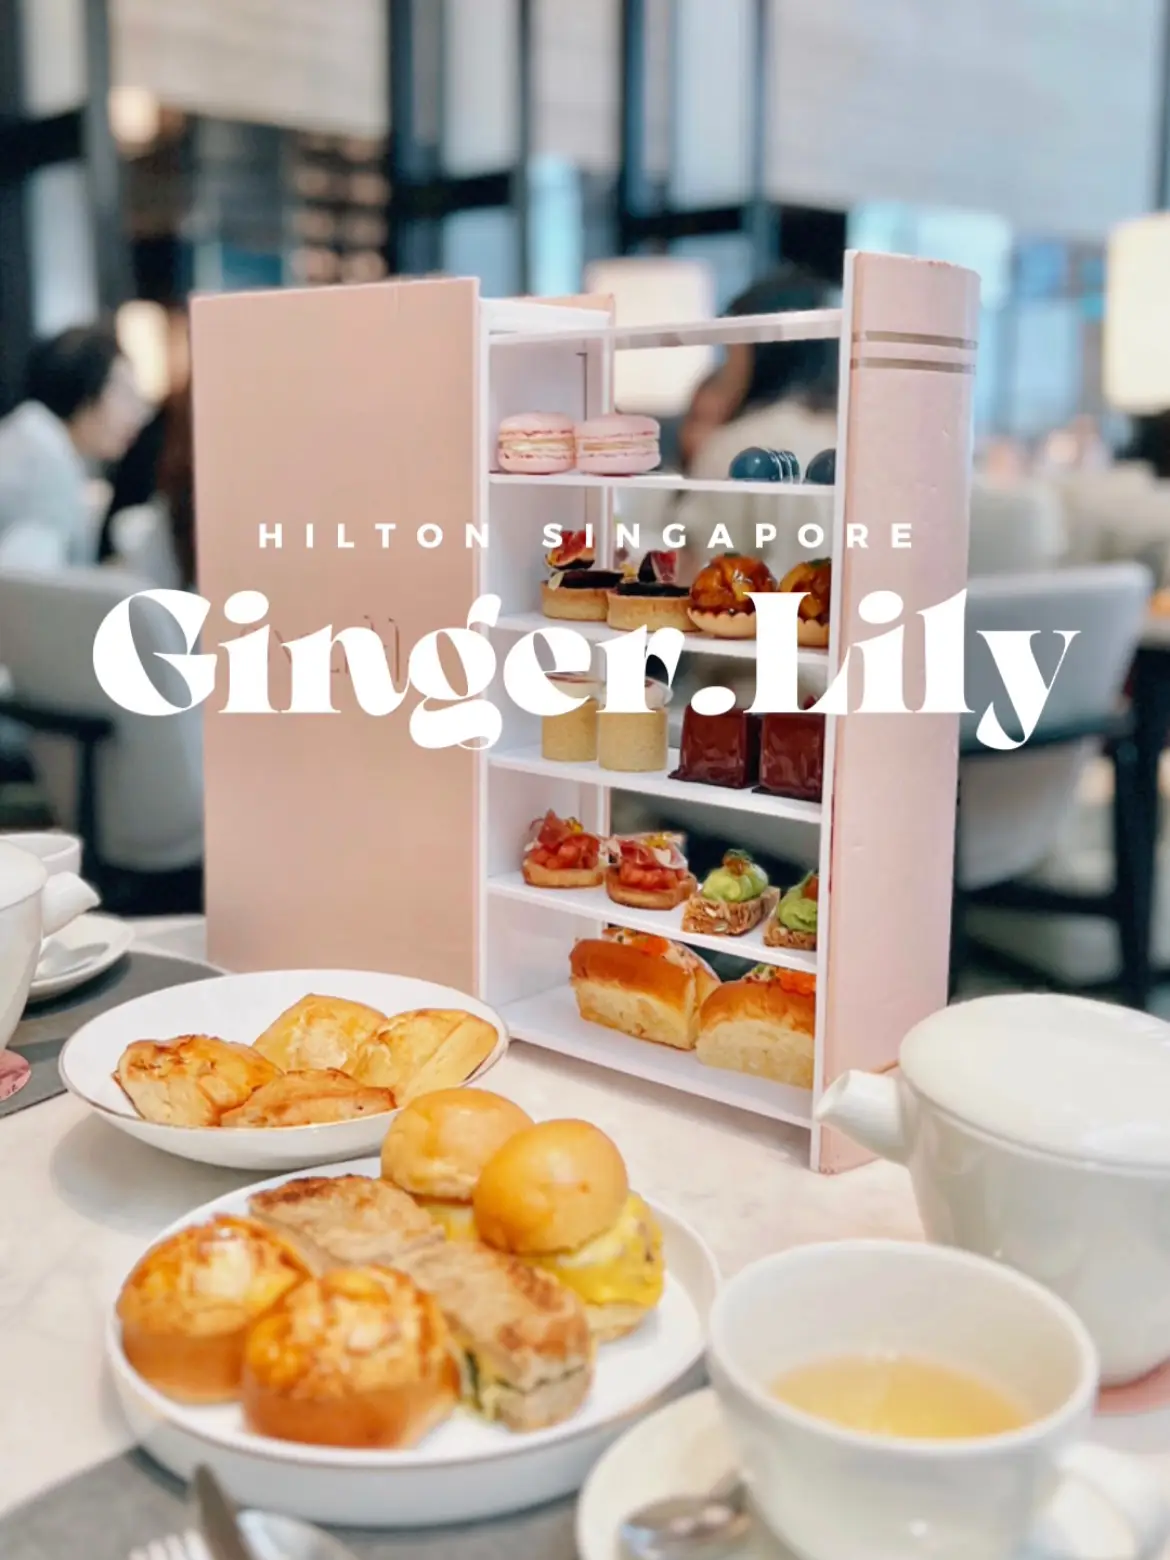 High Tea at Ginger Lily 's images